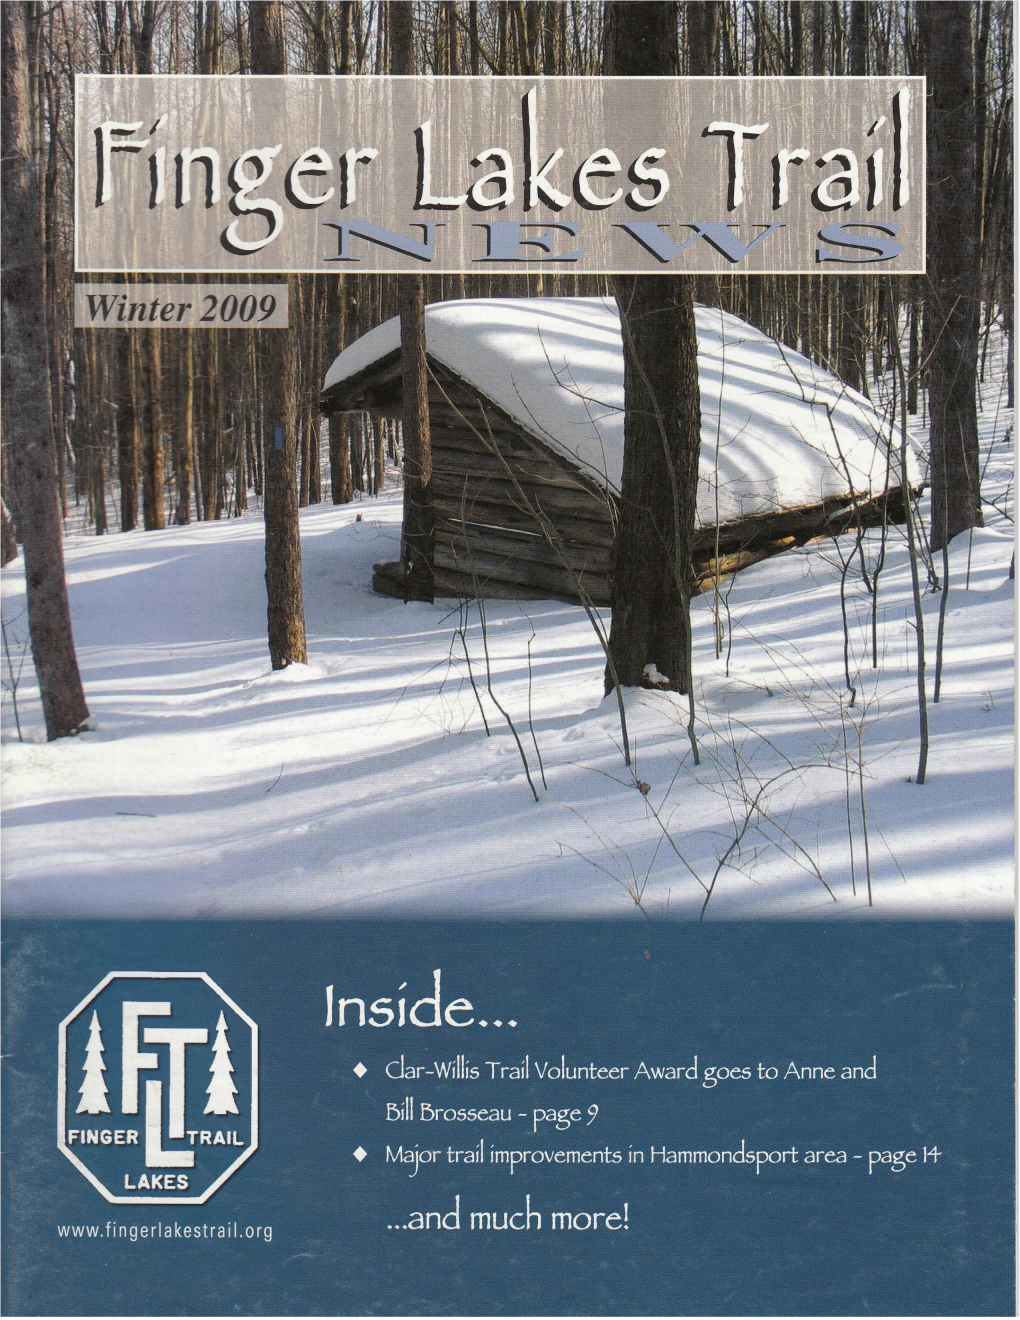 FINGER LAKES TRAIL NEWS Published for Members and Friends of the Finger Lakes Trail Conference, Inc